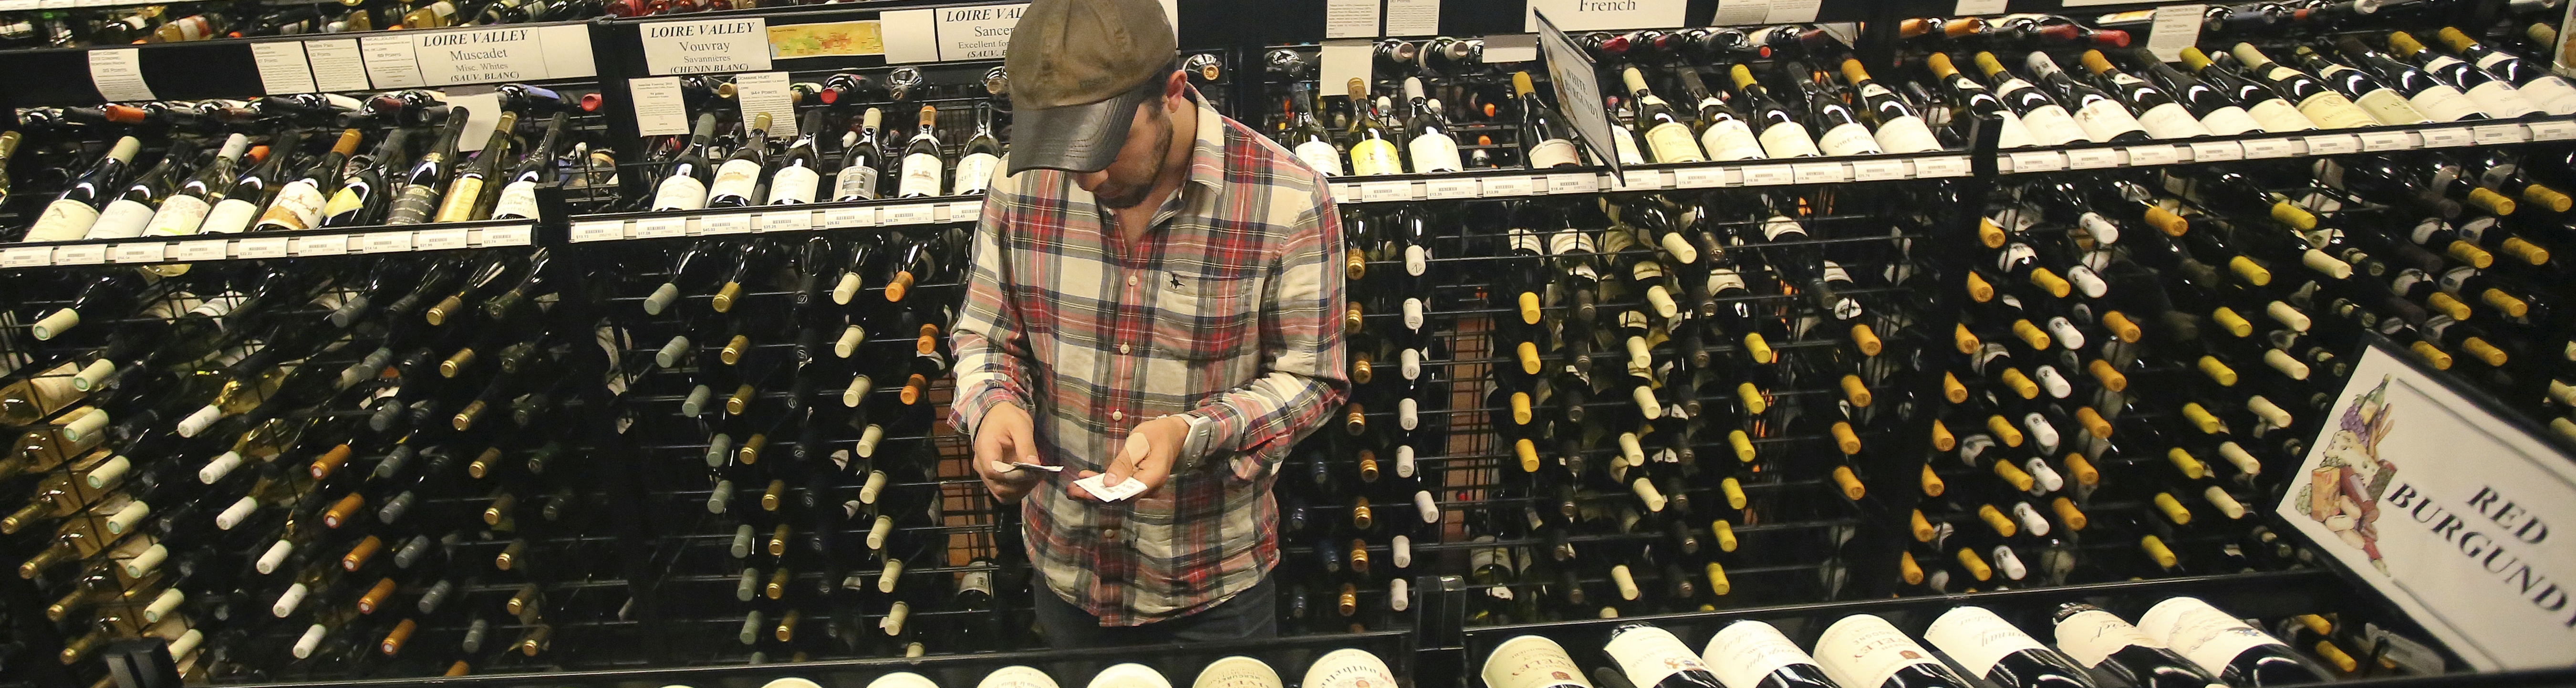  A worker at a state liquor store